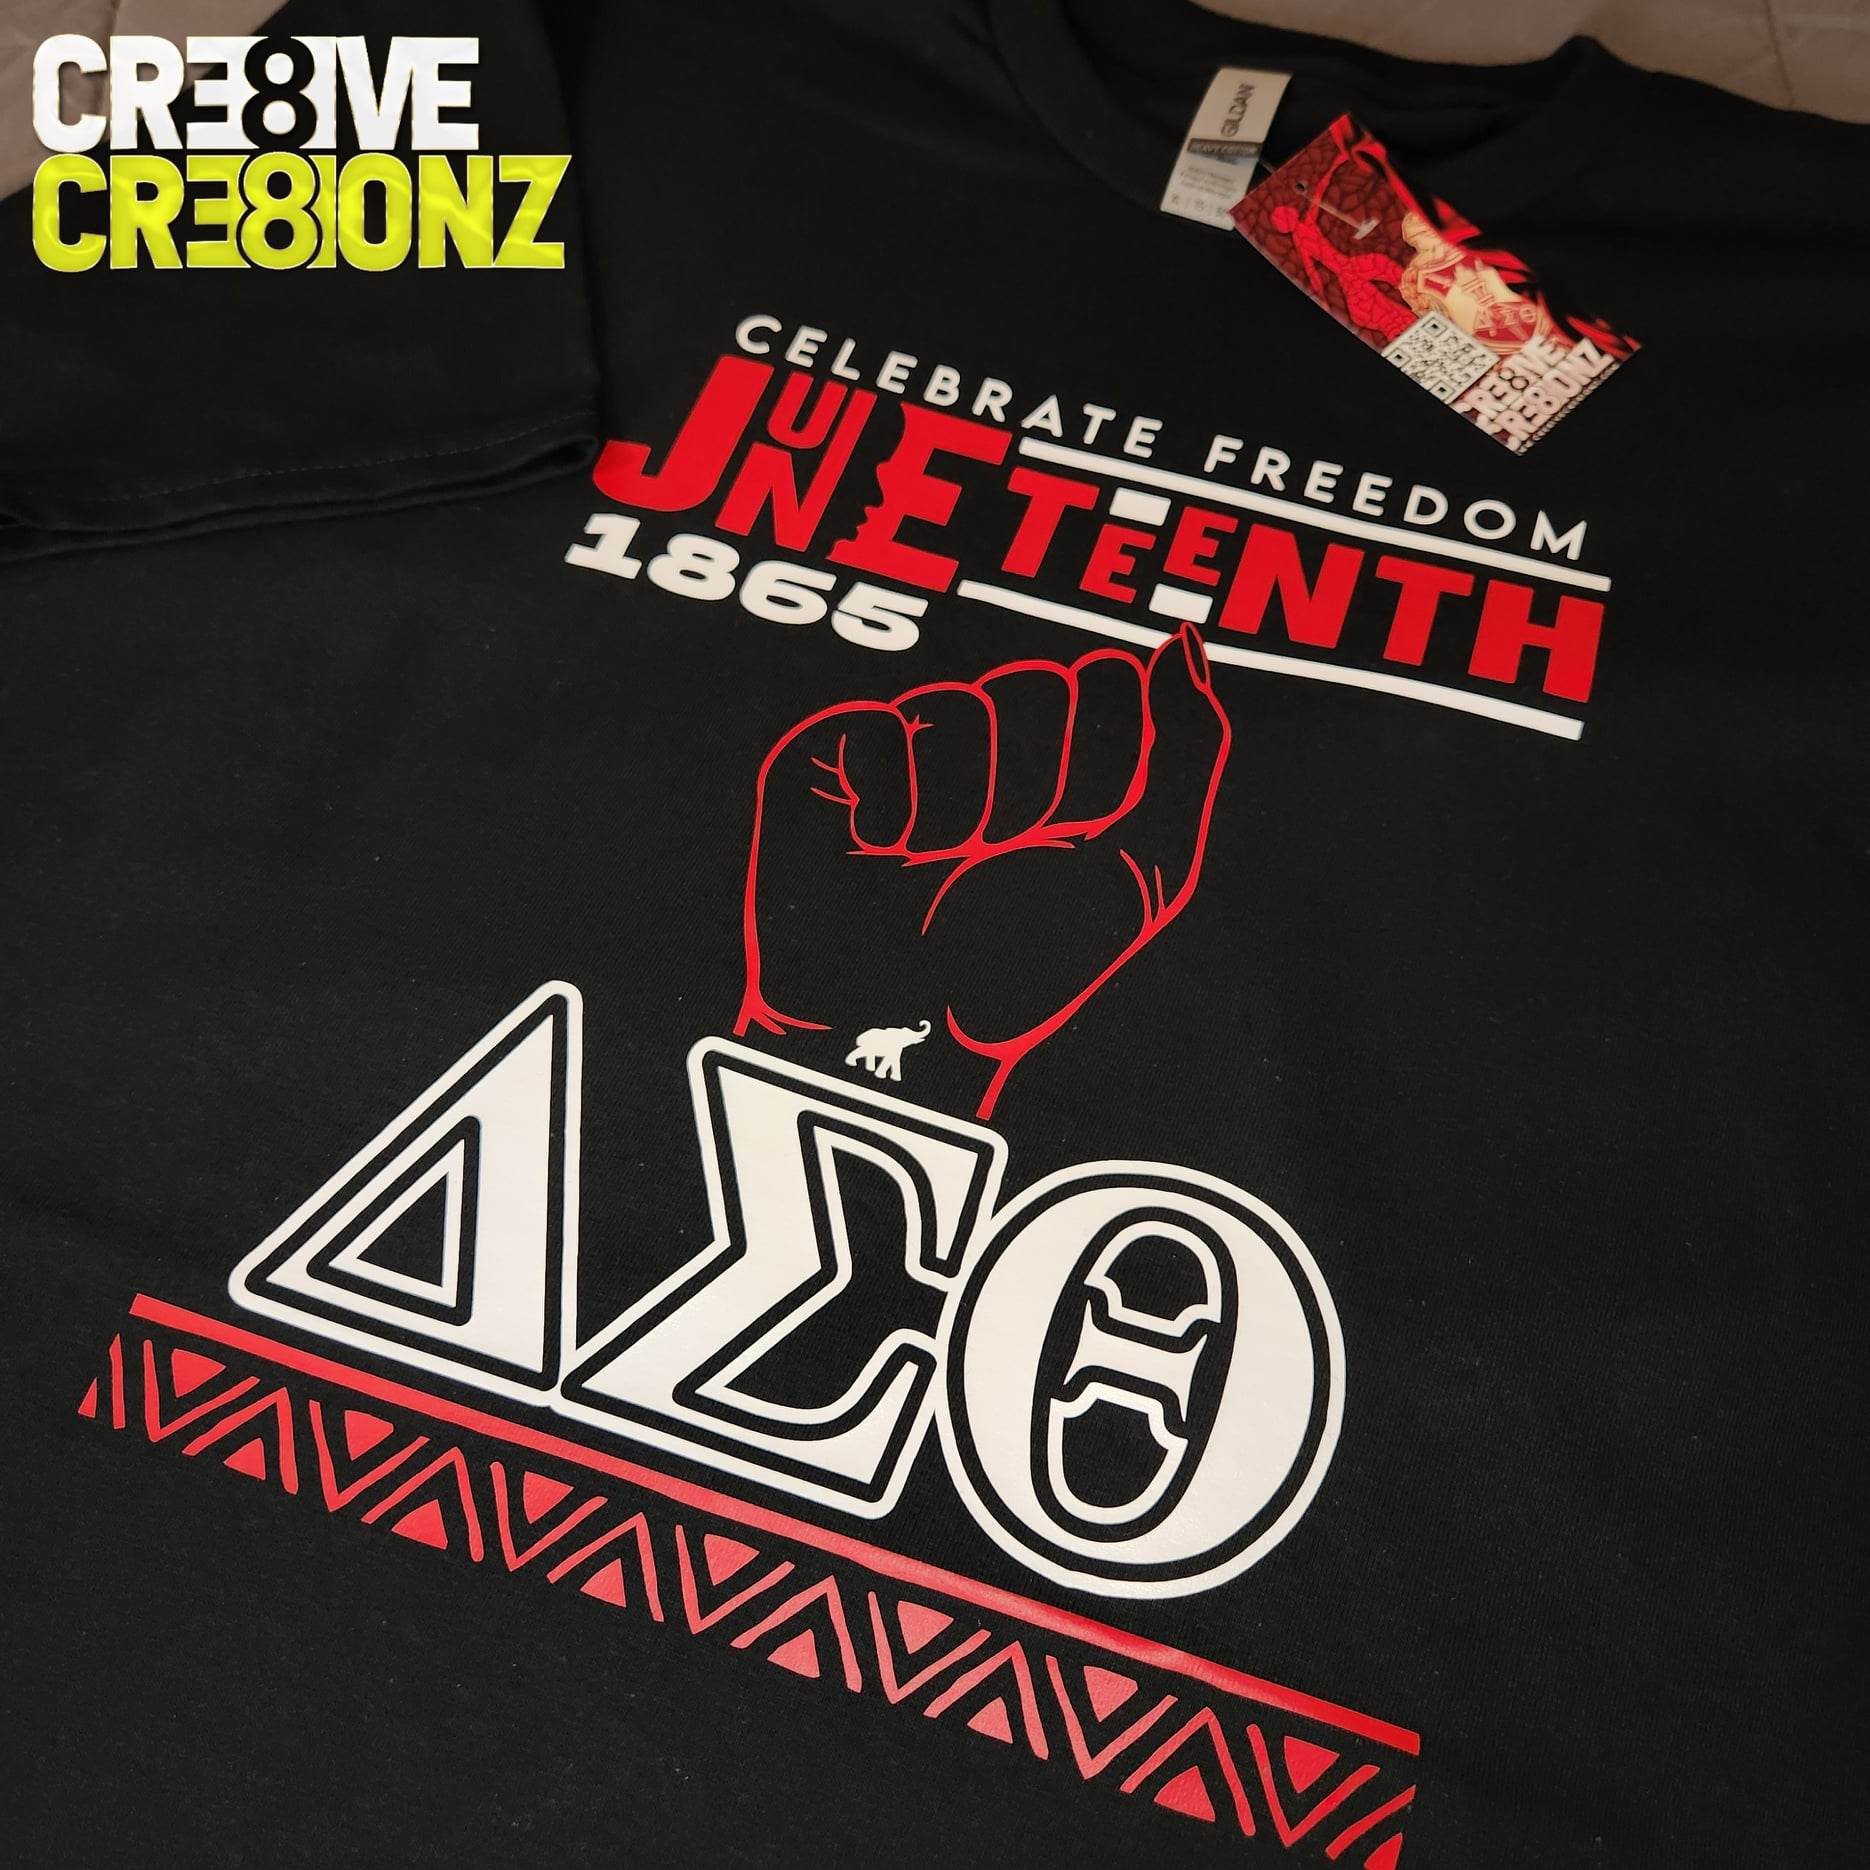 Juneteenth Delta Shirt - Cre8ive Cre8ionz